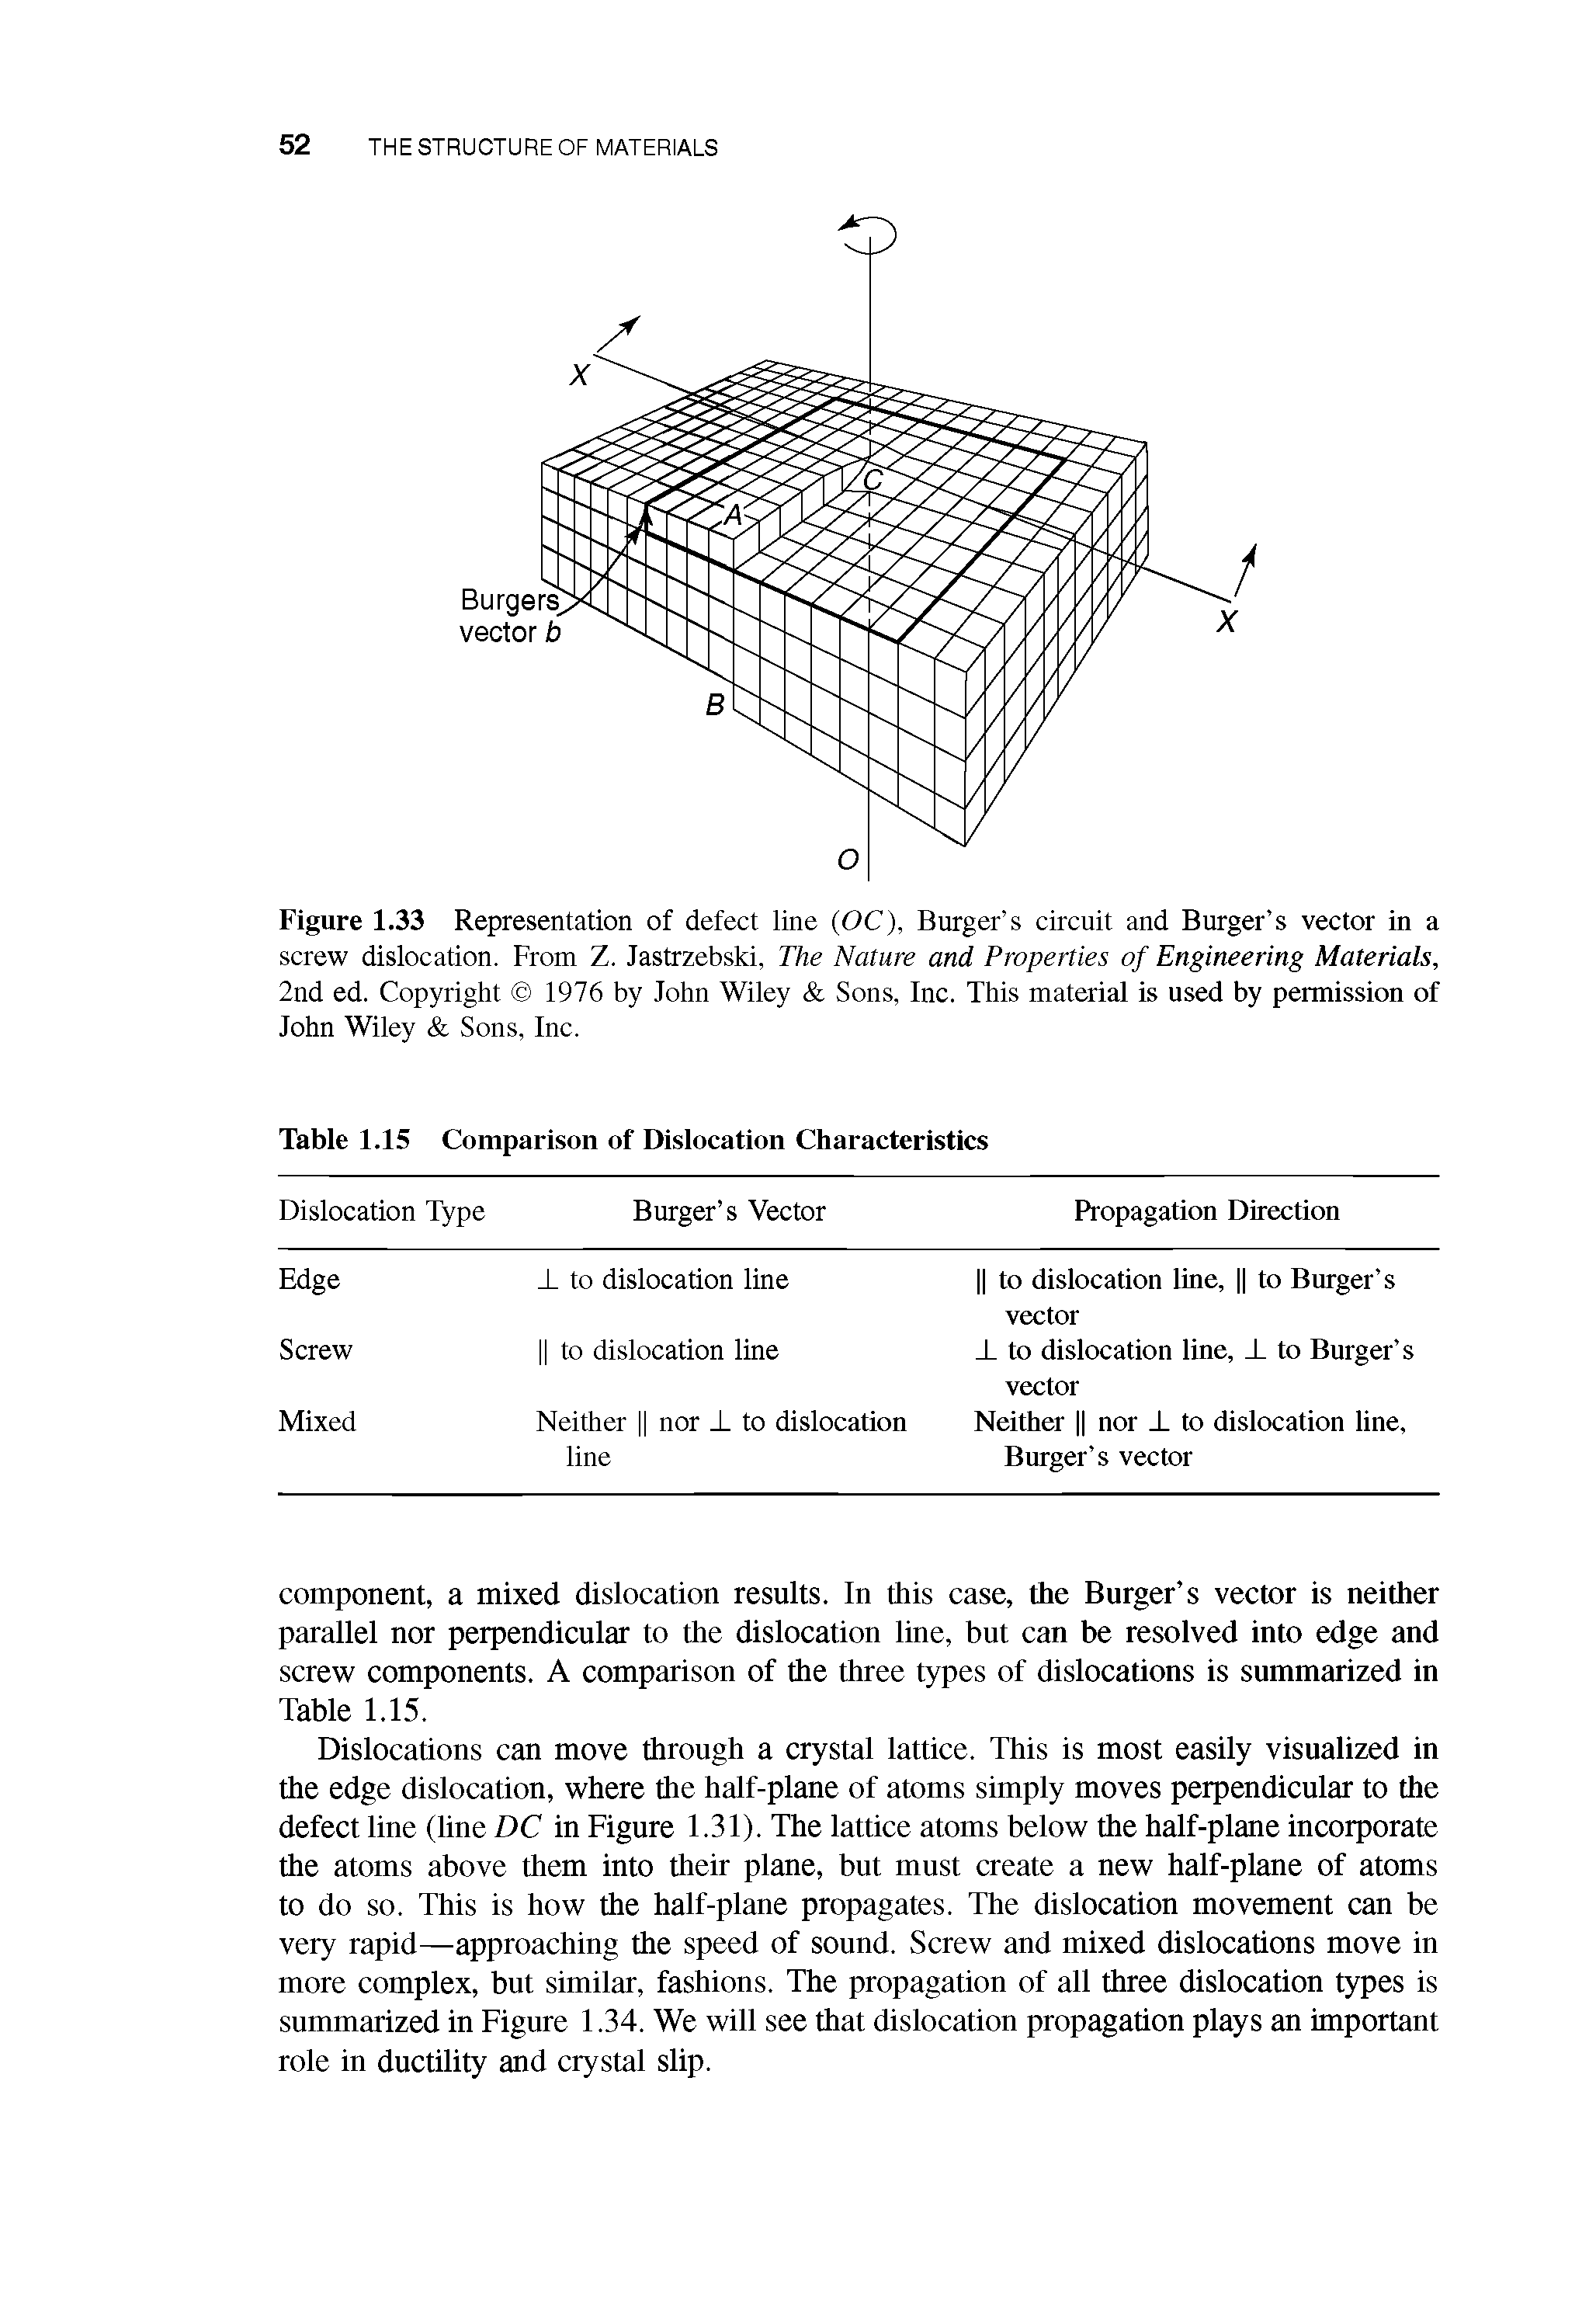 Figure 1.33 Representation of defect line (OC), Burger s circuit and Burger s vector in a screw dislocation. From Z. Jastrzebski, The Nature and Properties of Engineering Materials, 2nd ed. Copyright 1976 by John Wiley Sons, Inc. This material is used by permission of John Wiley Sons, Inc.